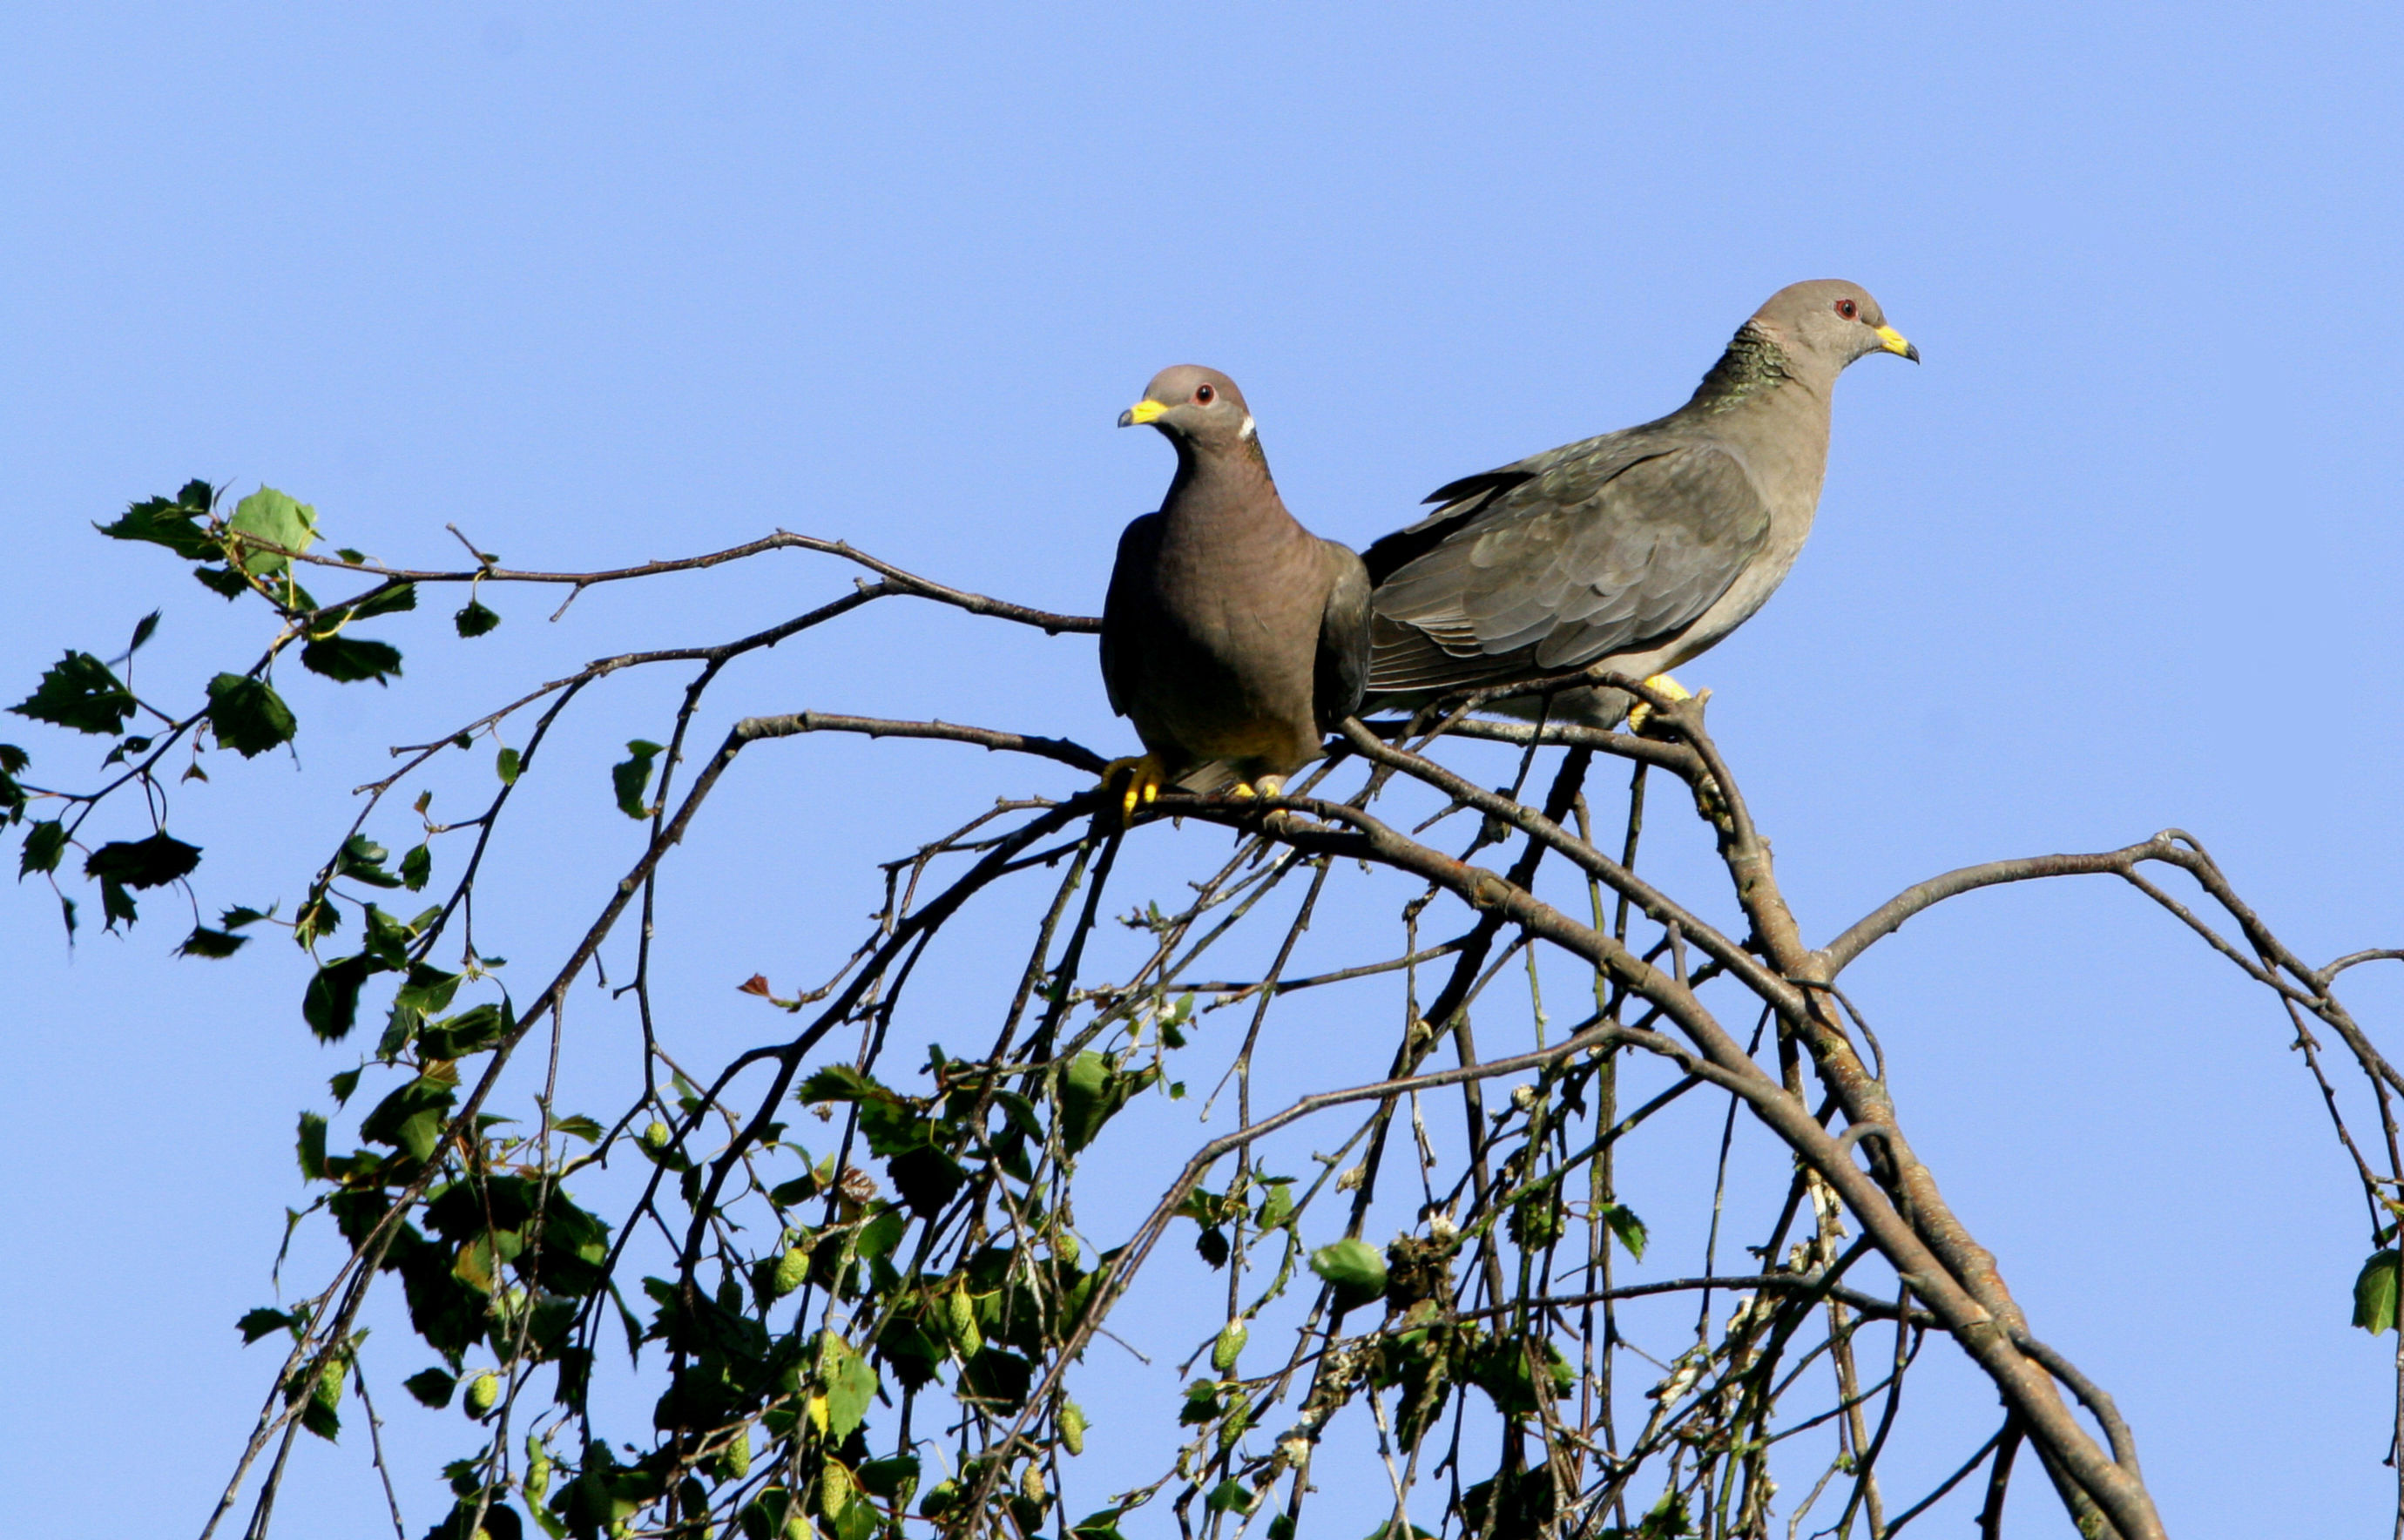 Southern band-tailed pigeon | Windy Hills Waterfowl